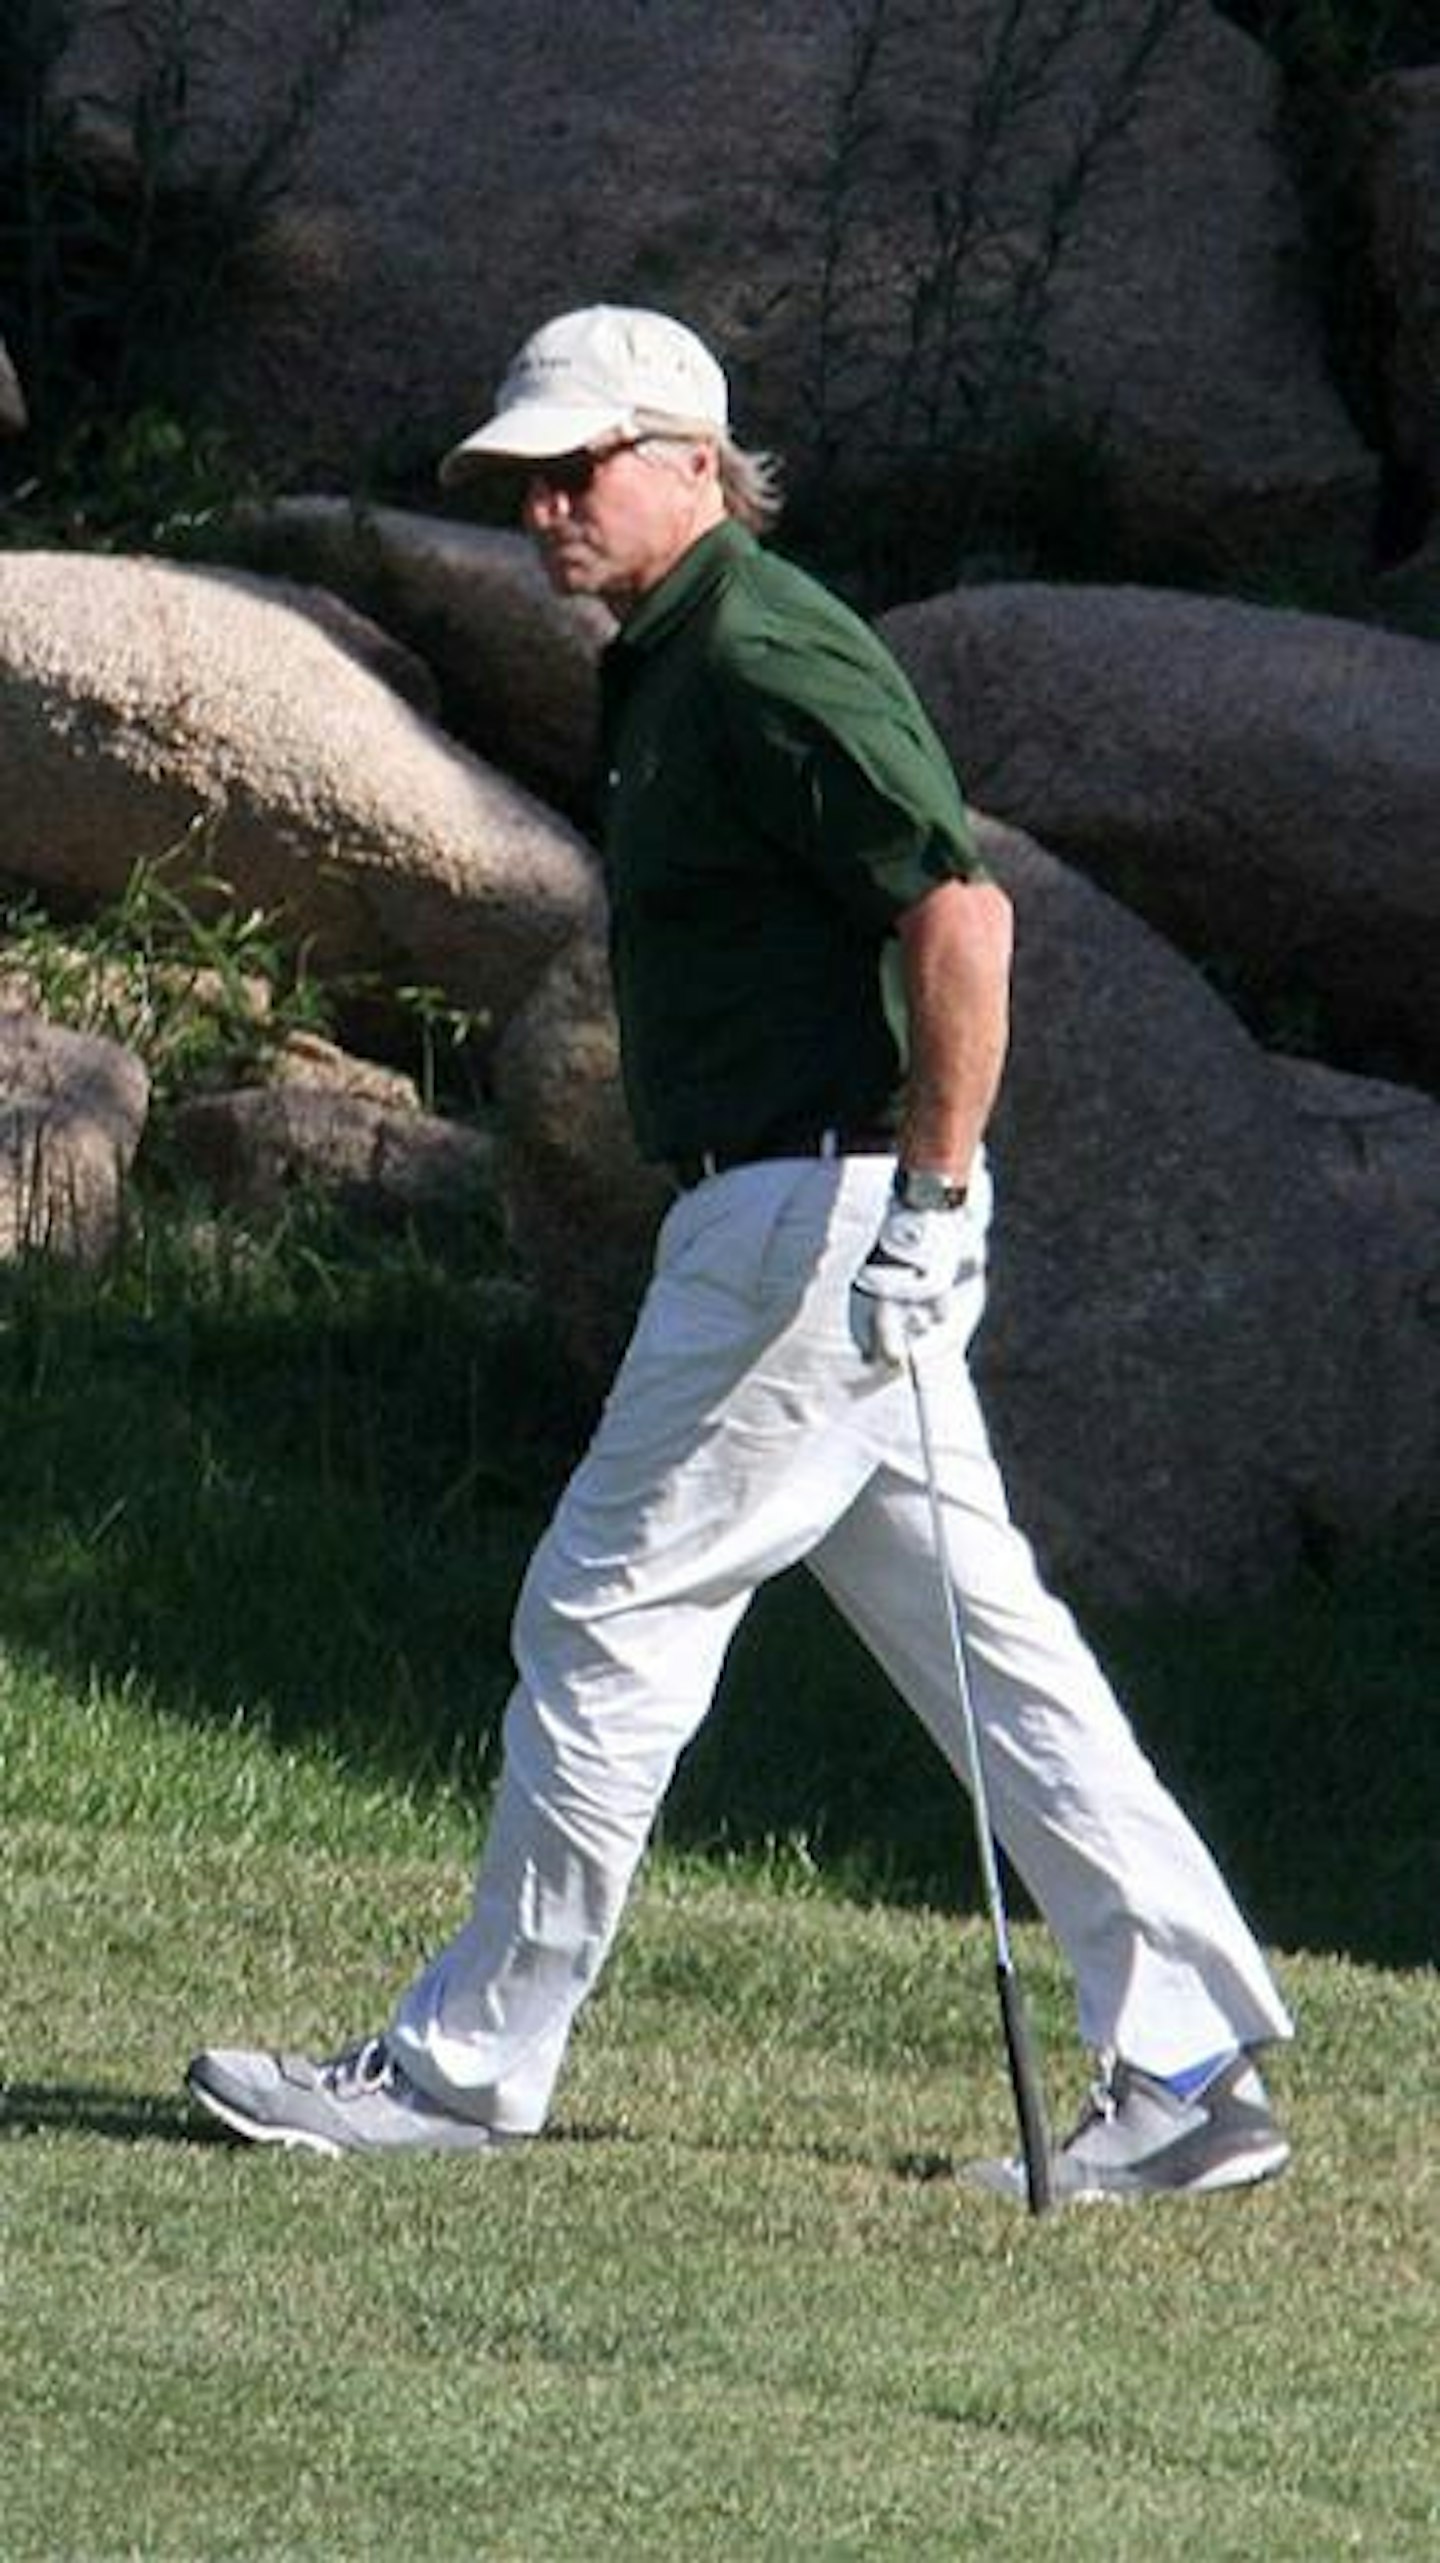 Michael playing golf alone in Italy last week